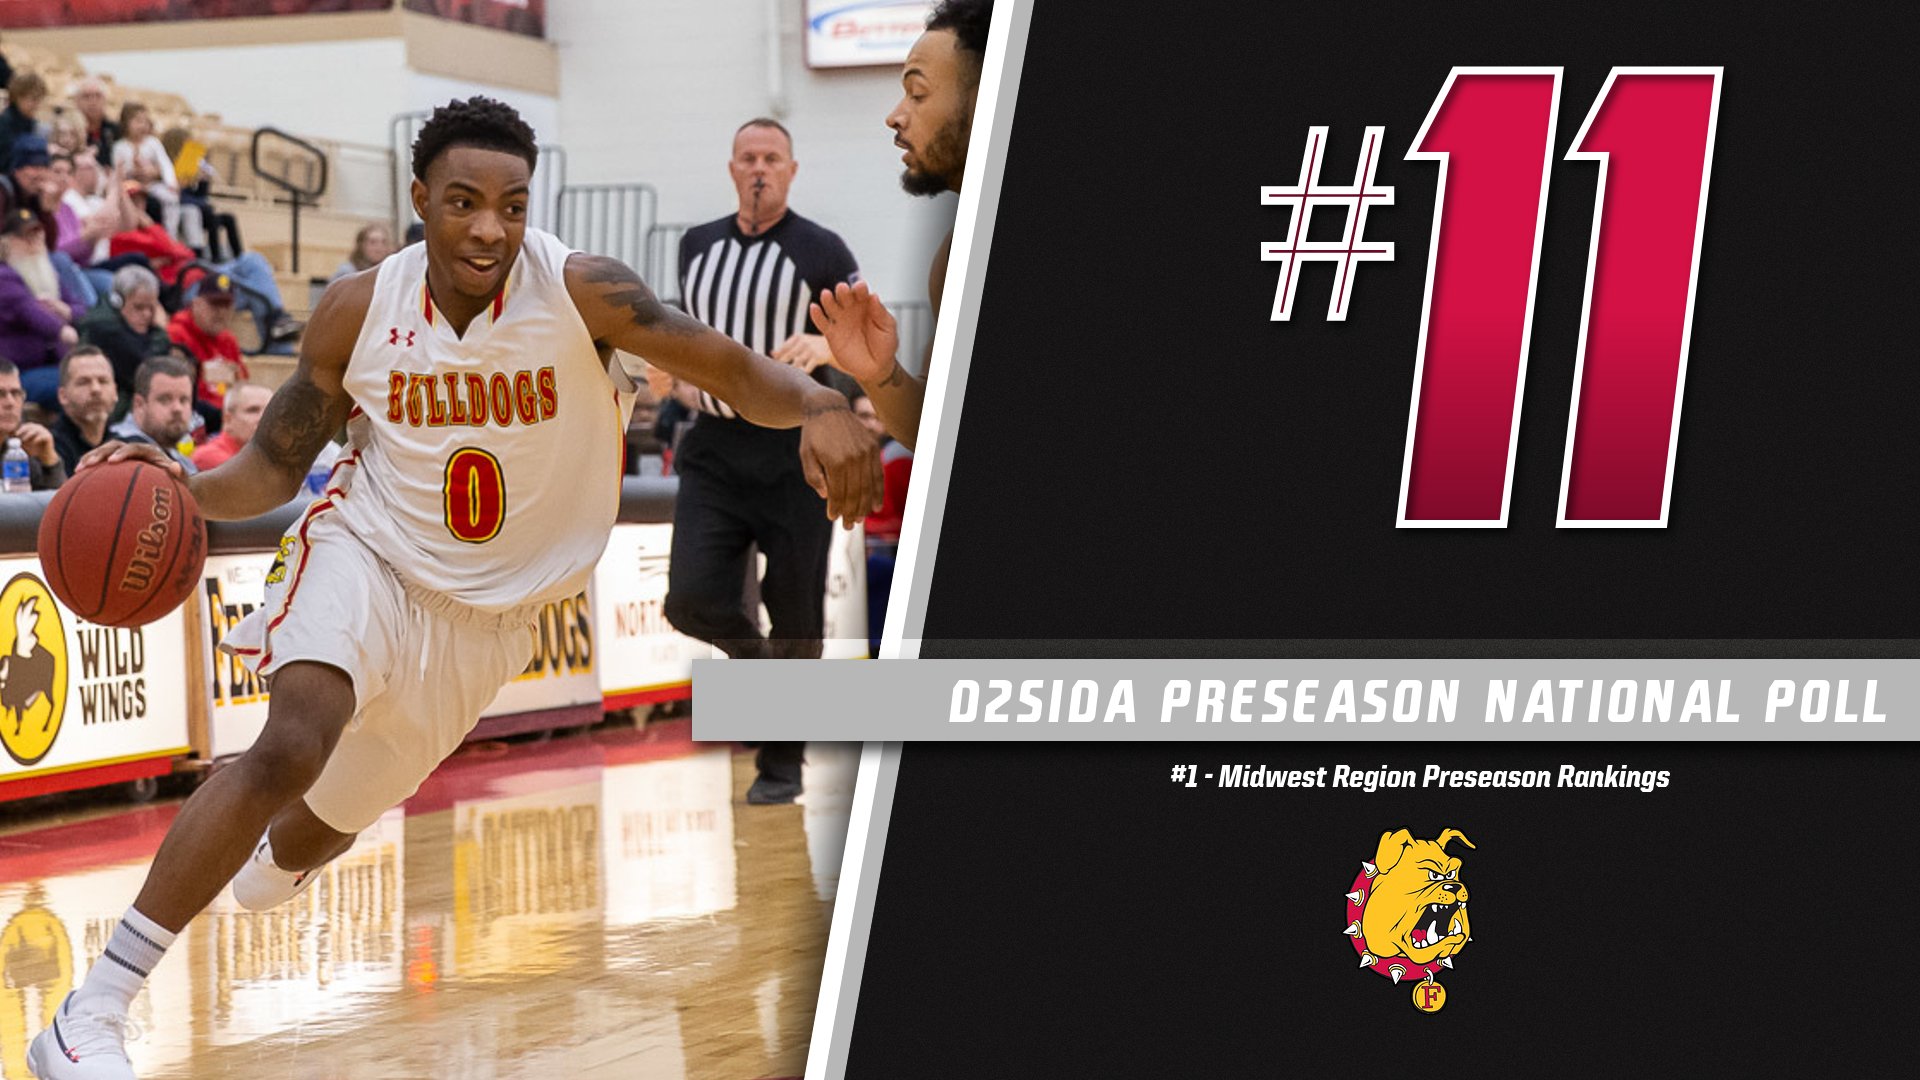 Ferris State Men's Basketball Picked #11 Nationally And Tops In Region By D2SIDA